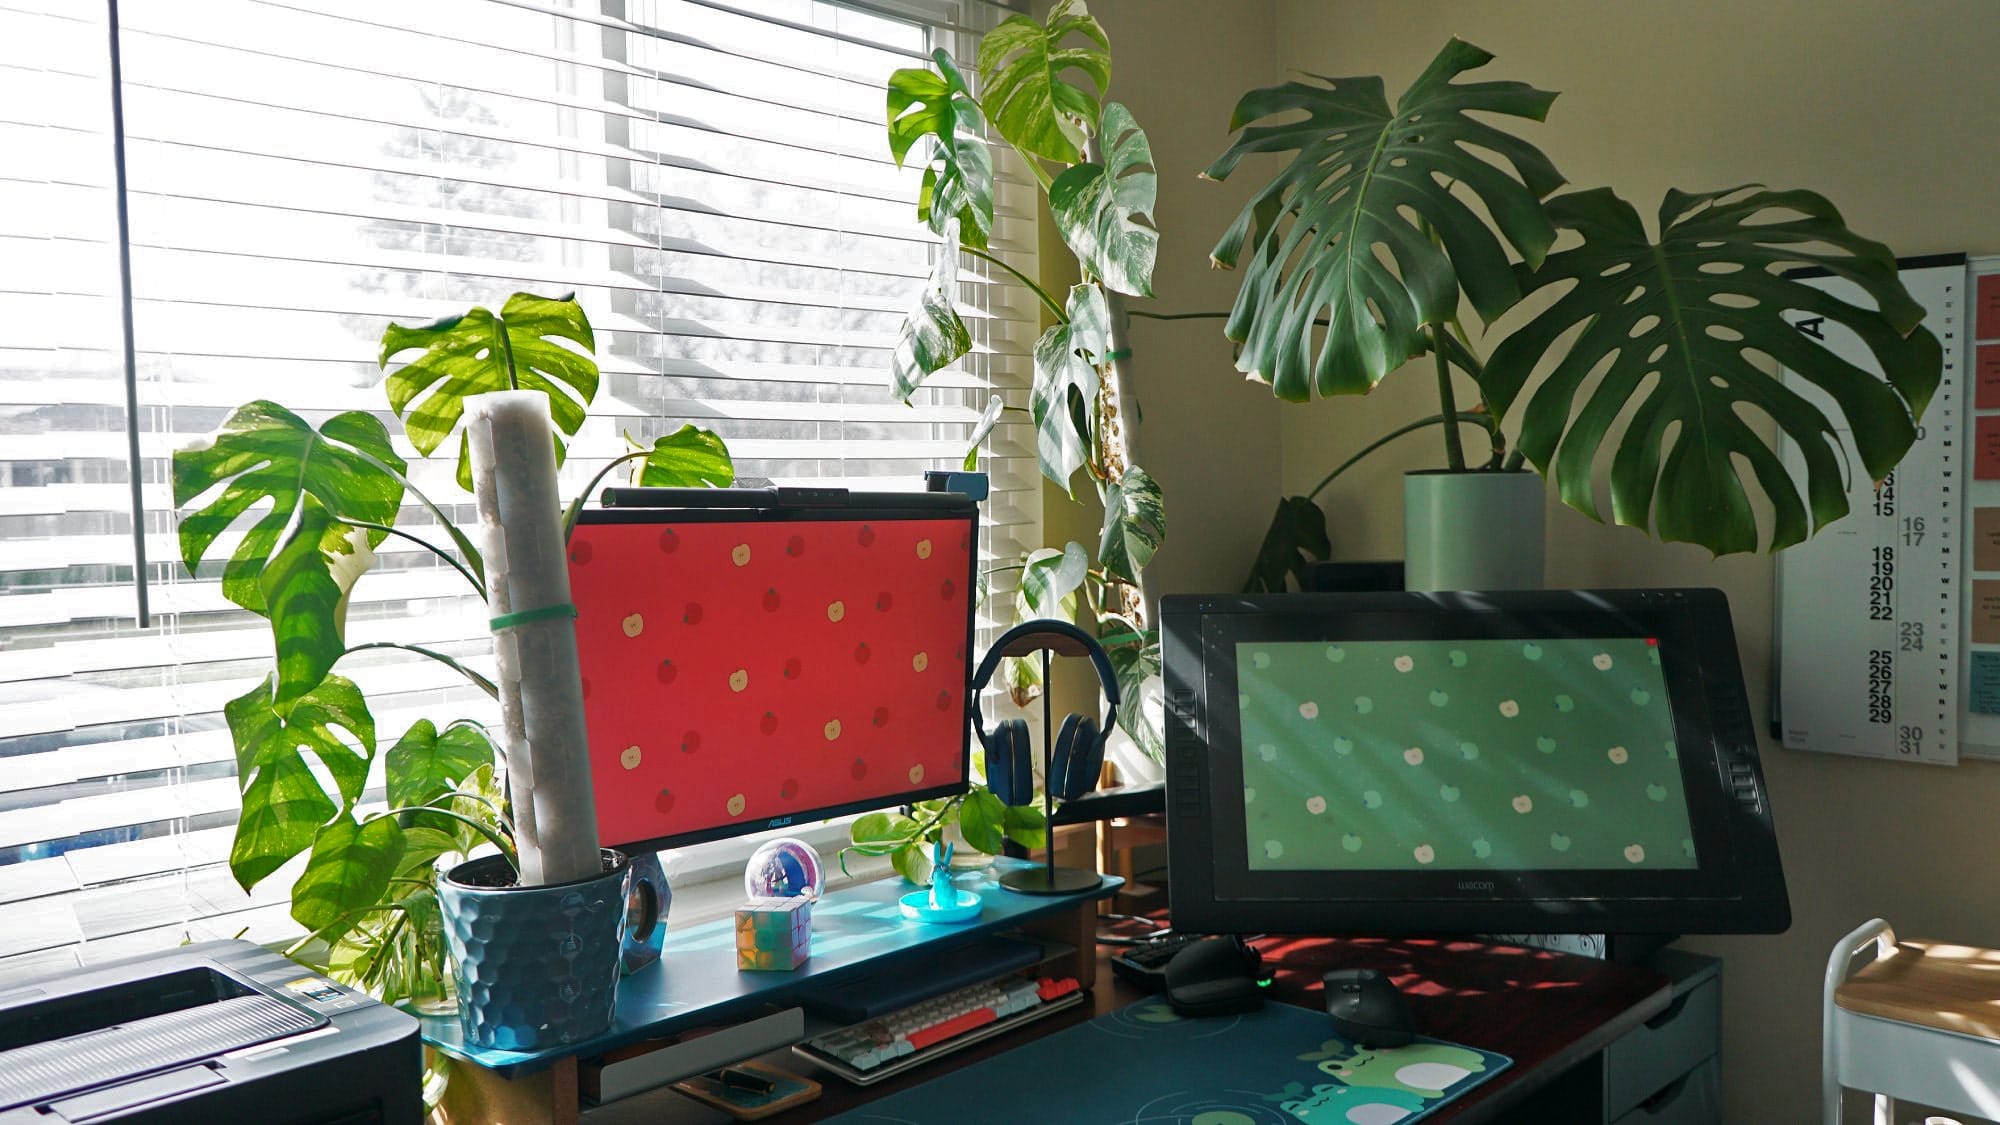 A well-lit home office featuring a large monitor, a graphic tablet, an ergonomic chair, and a variety of plants and stationery